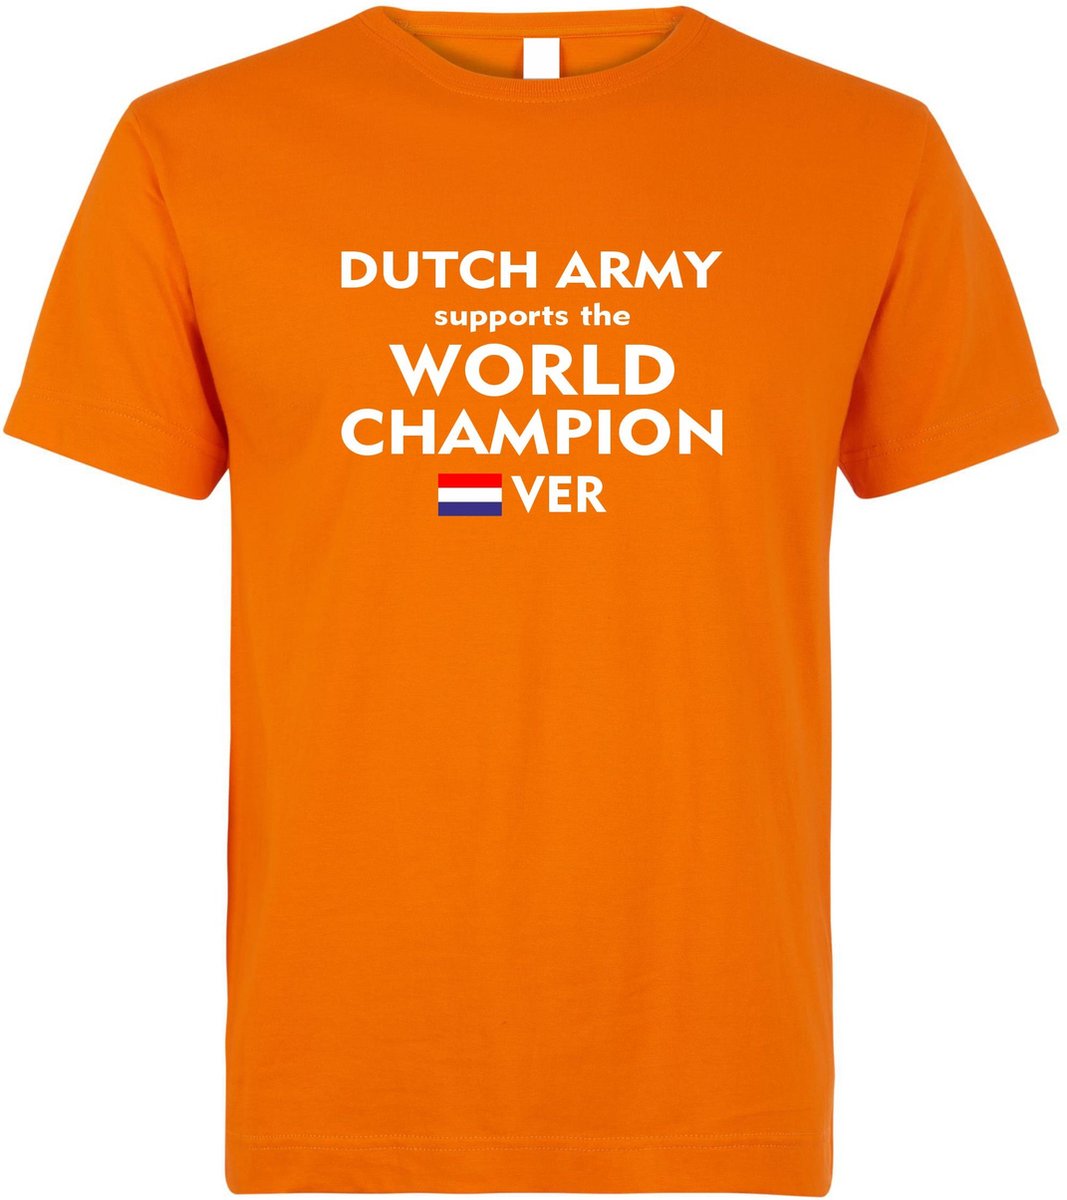 T-shirt Dutch Army supports the World Champion | Formule 1 fan | Max Verstappen / Red Bull racing supporter | Oranje | maat XXL